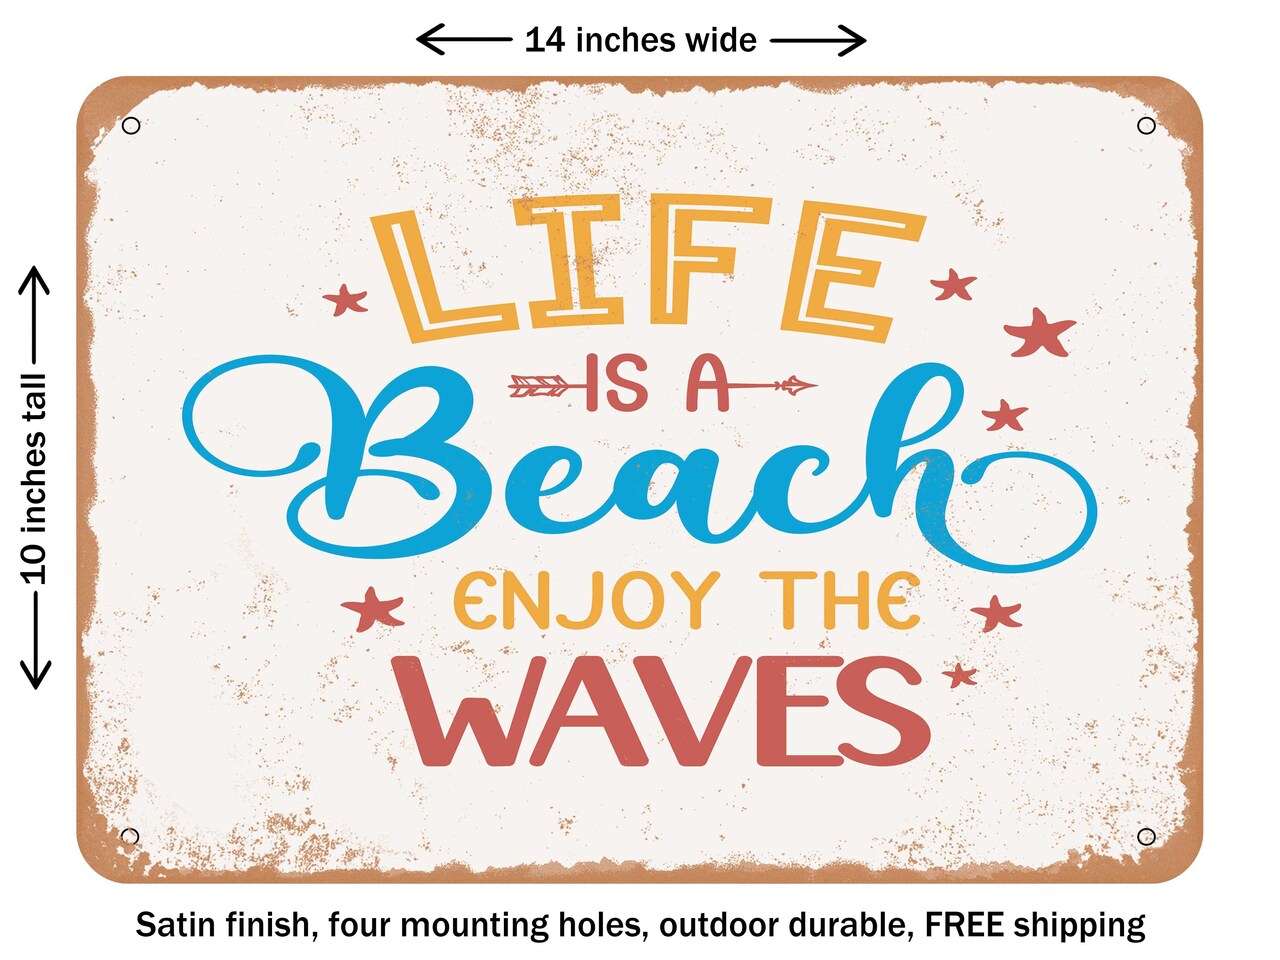 DECORATIVE METAL SIGN - Life is a Beach Enjoy the Waves - Vintage Rusty Look